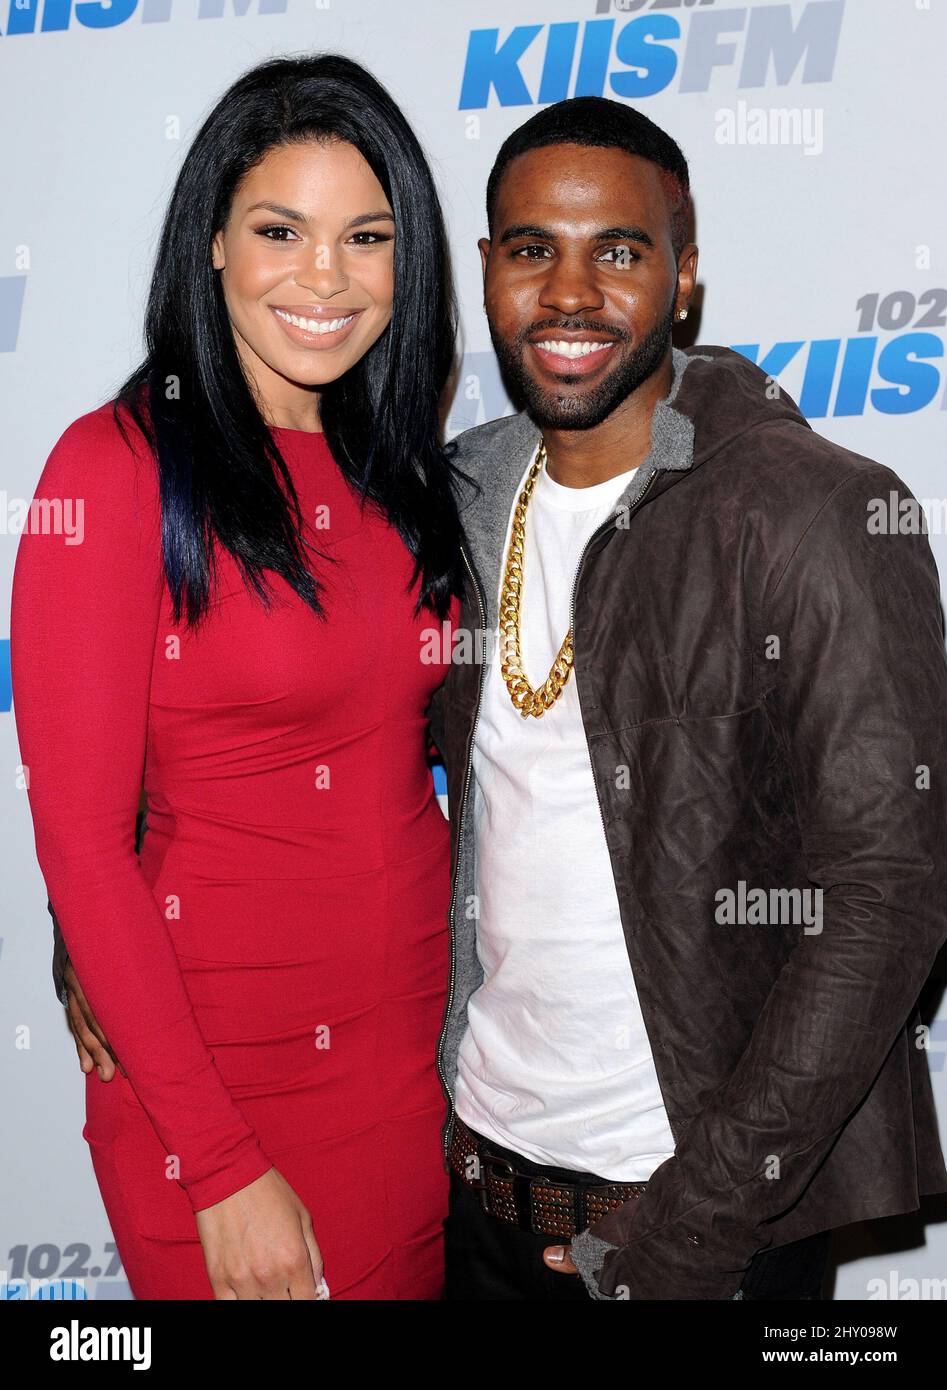 Jordin Sparks and Jason Derulo attending the 2012 KIIS FM 'Jingle Ball' Night 2 held at the Nokia Theatre in Los Angeles, USA. Stock Photo